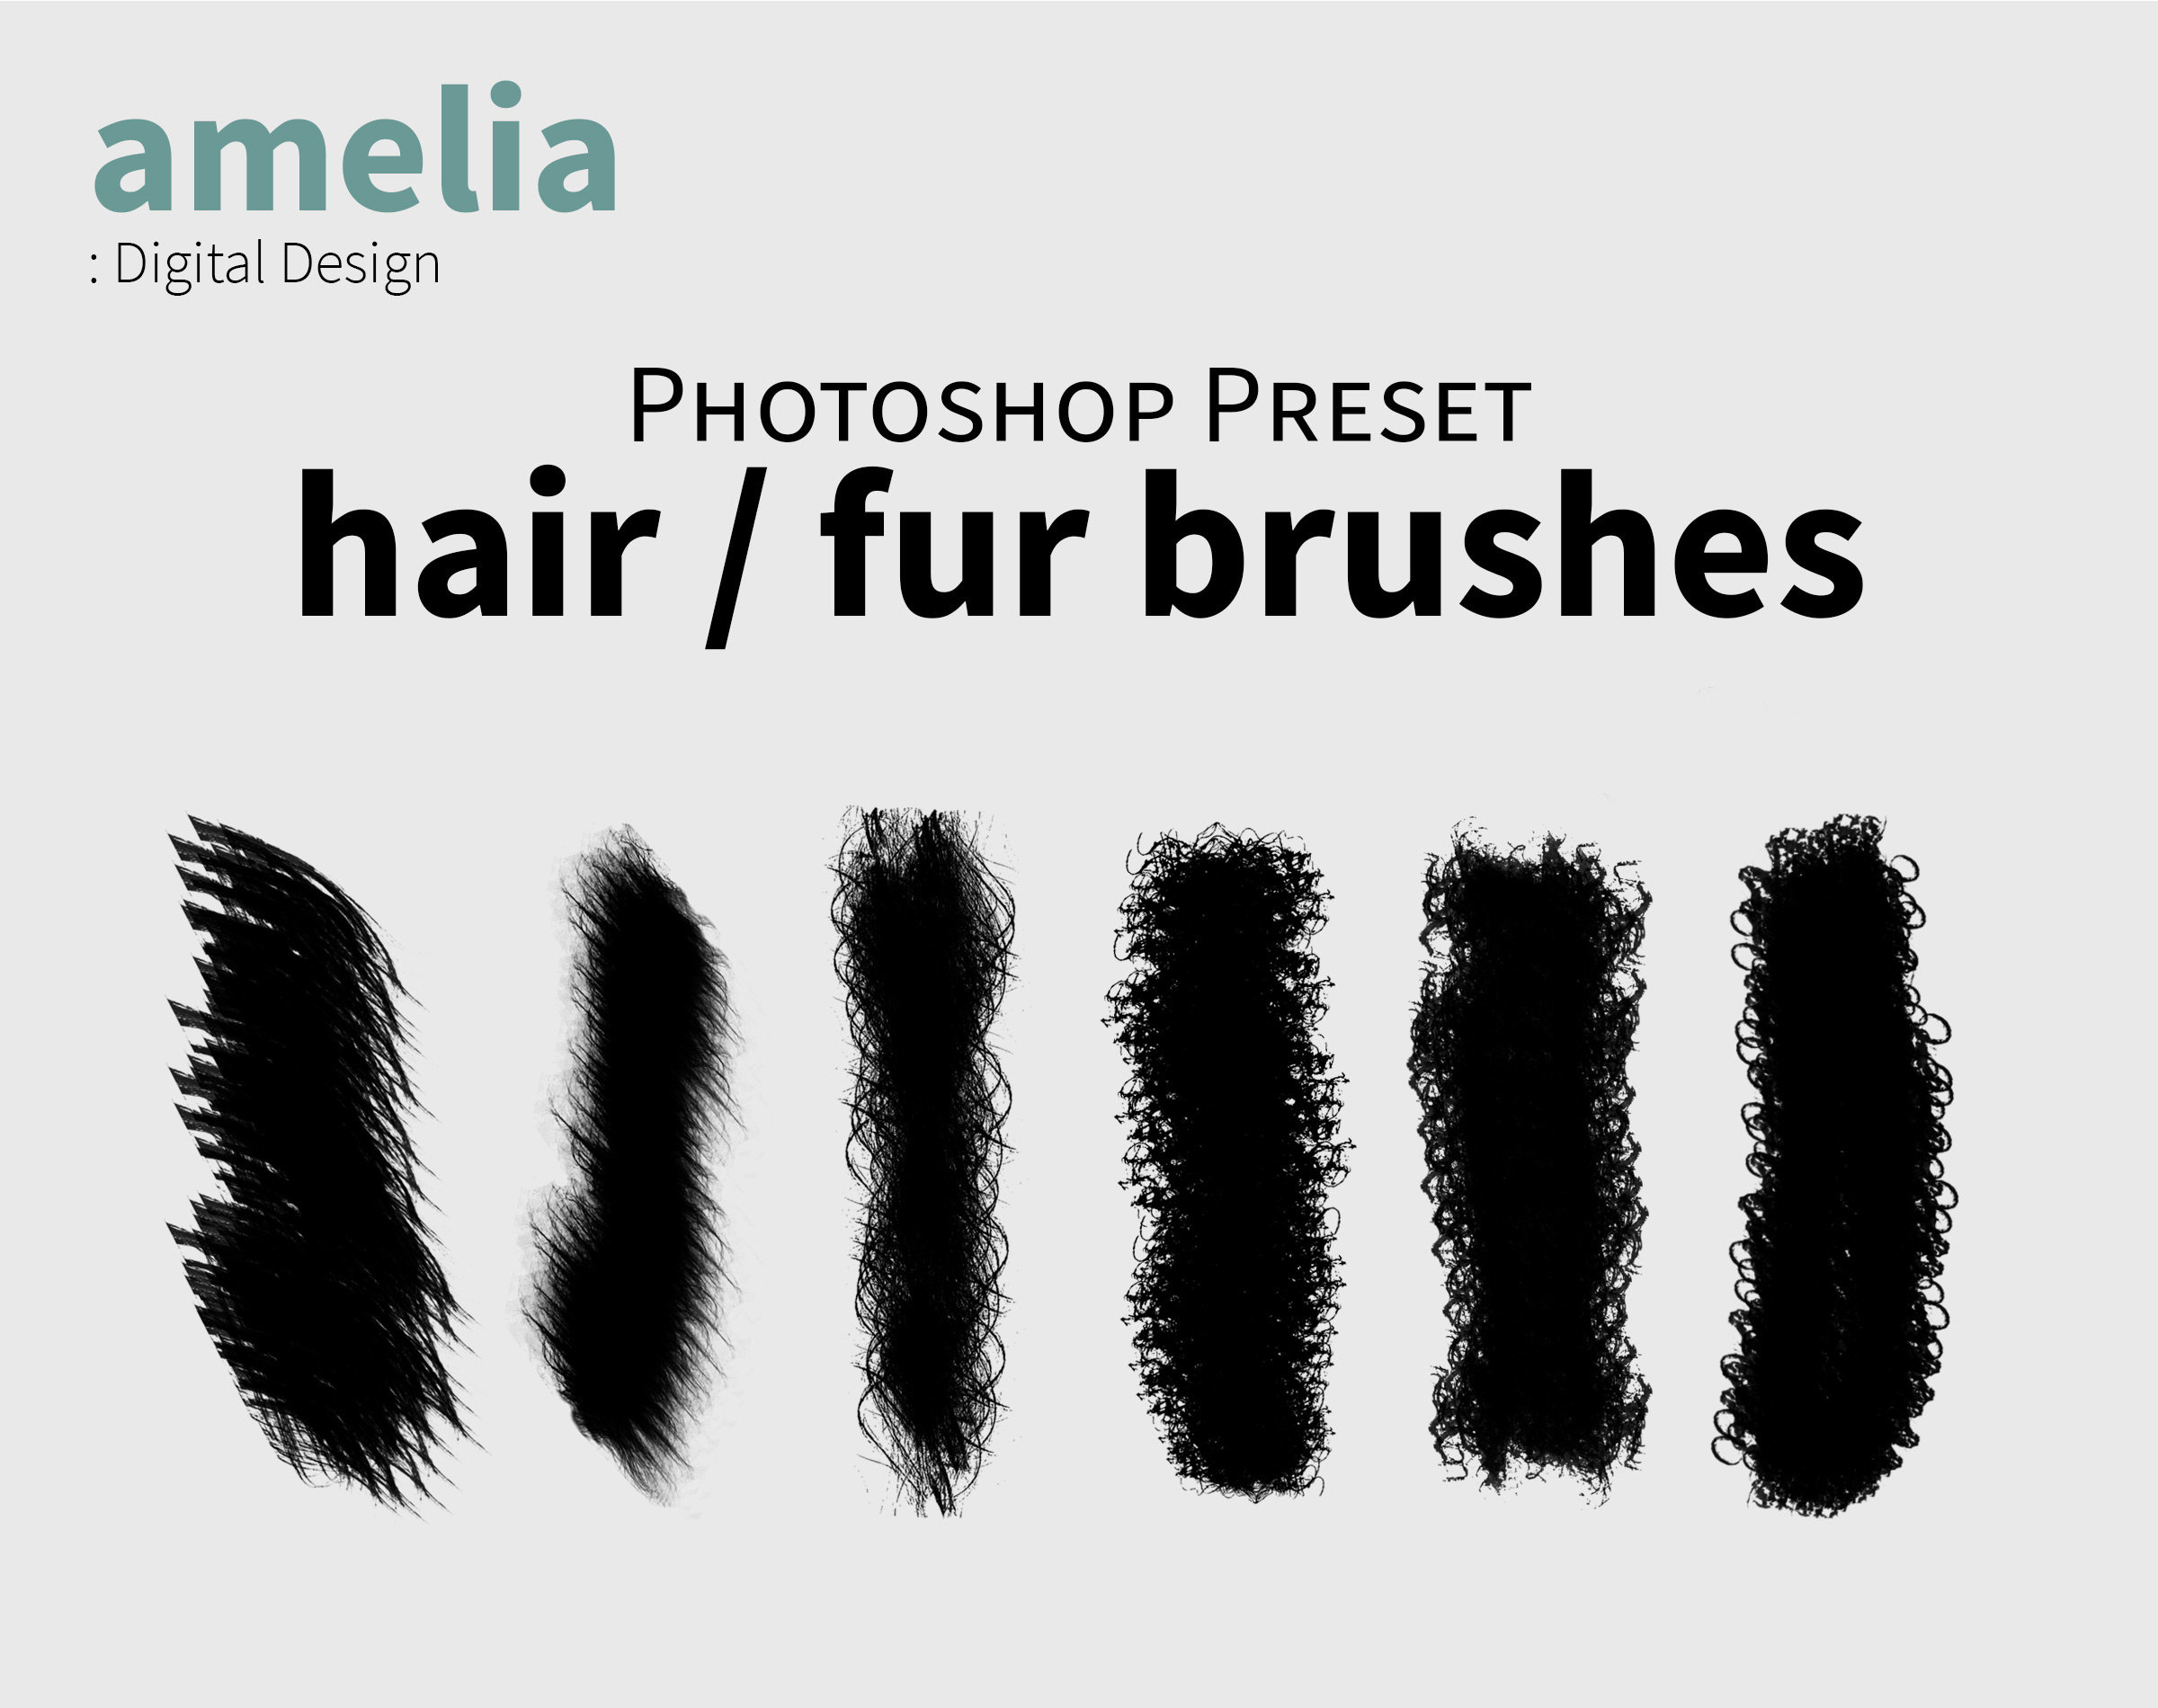 6 Photoshop Brushes Hair / Fur for Digital Art and - Etsy